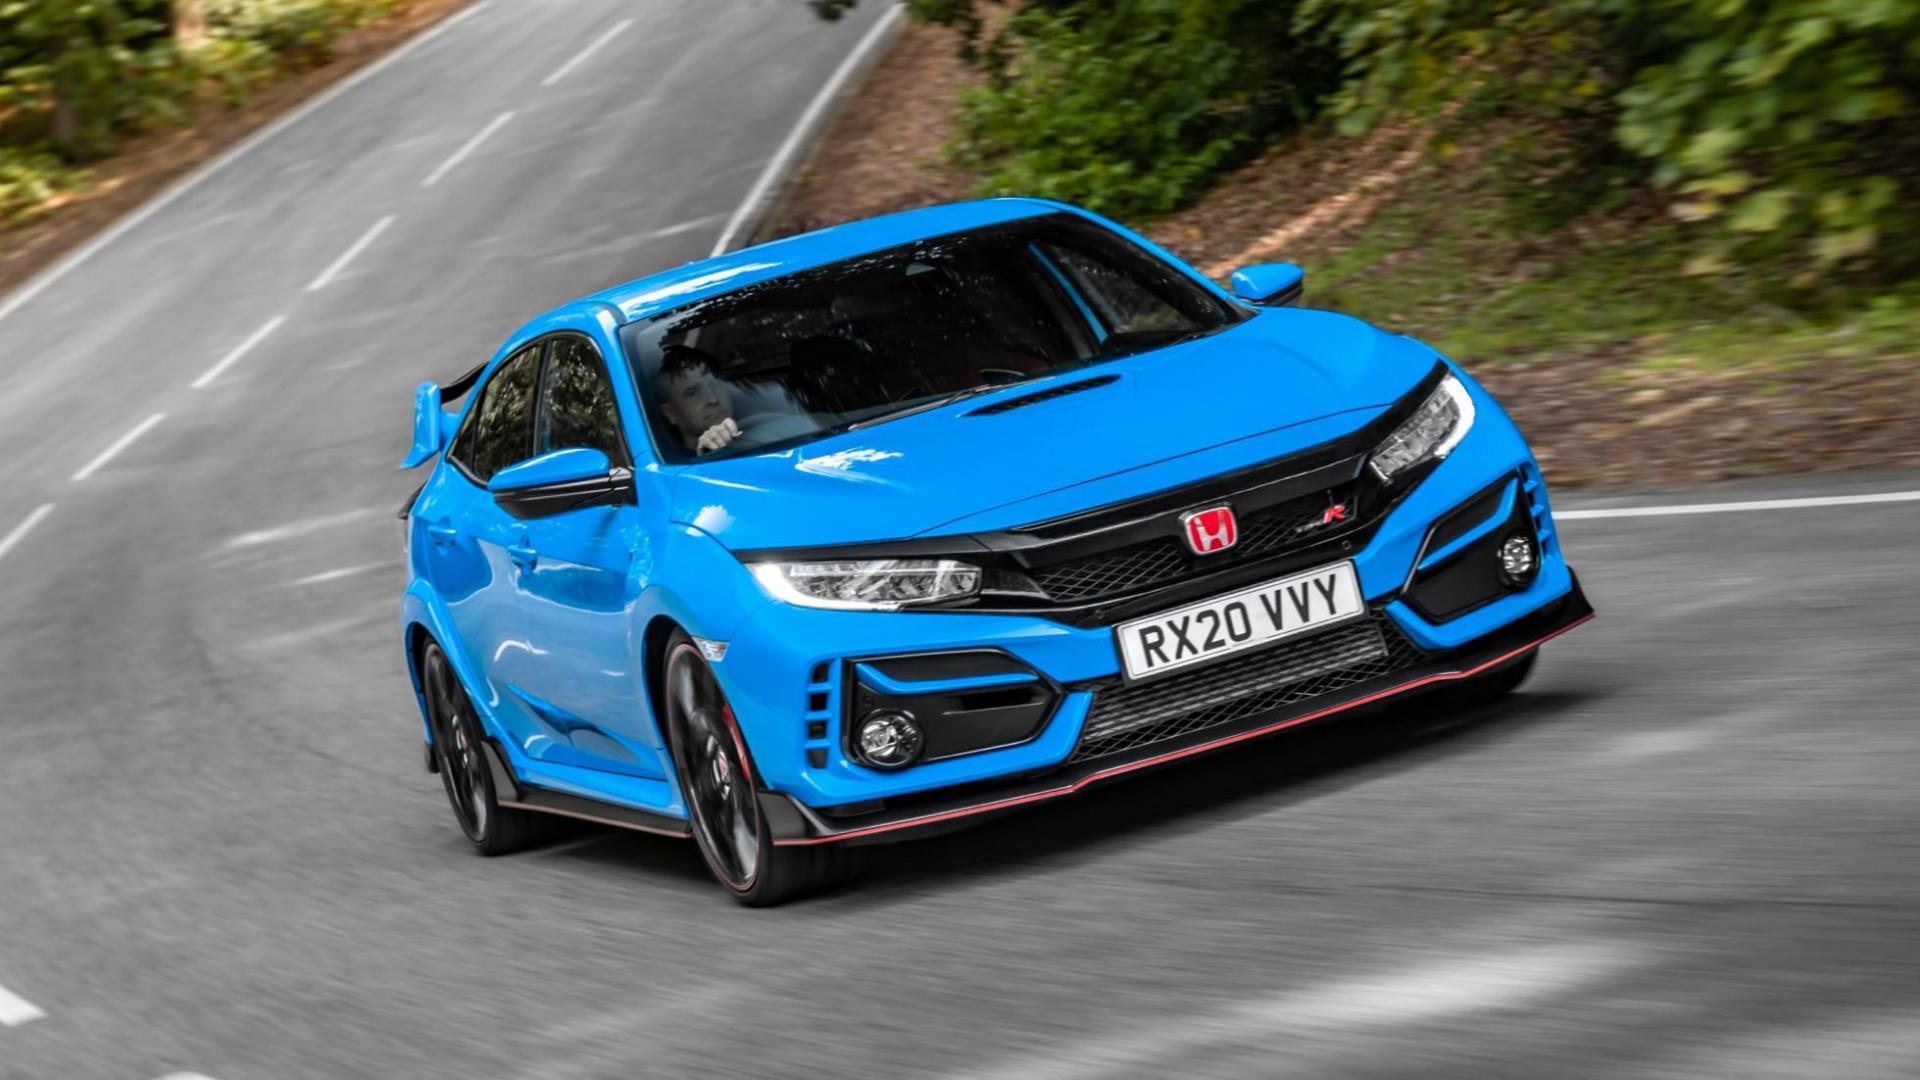 What would you fit a Honda Civic Type R crate engine into?